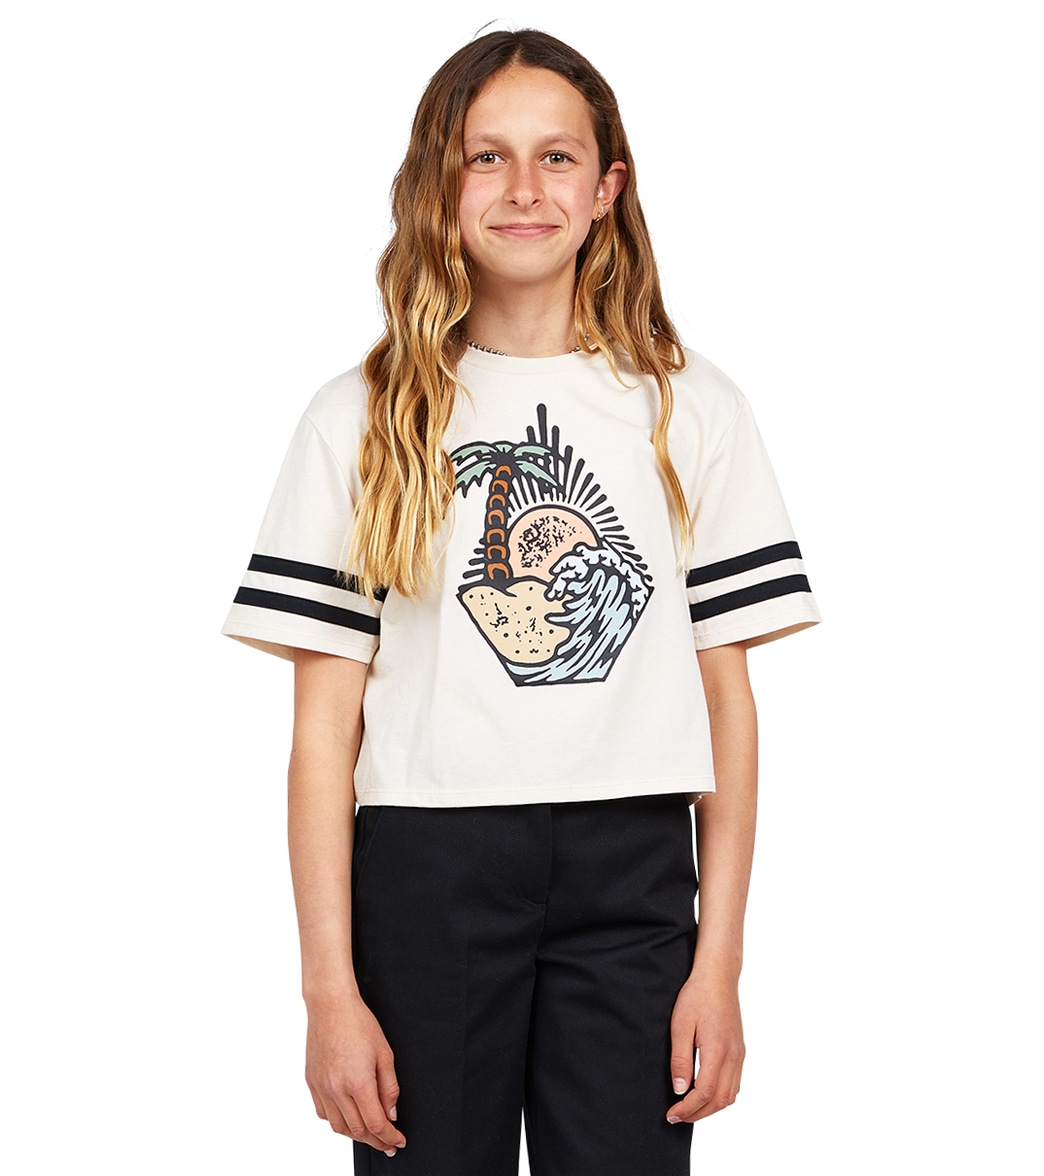 Volcom Girls' Truly Stoked Tee Shirt Big Kid - Sand Large Cotton/Polyester - Swimoutlet.com